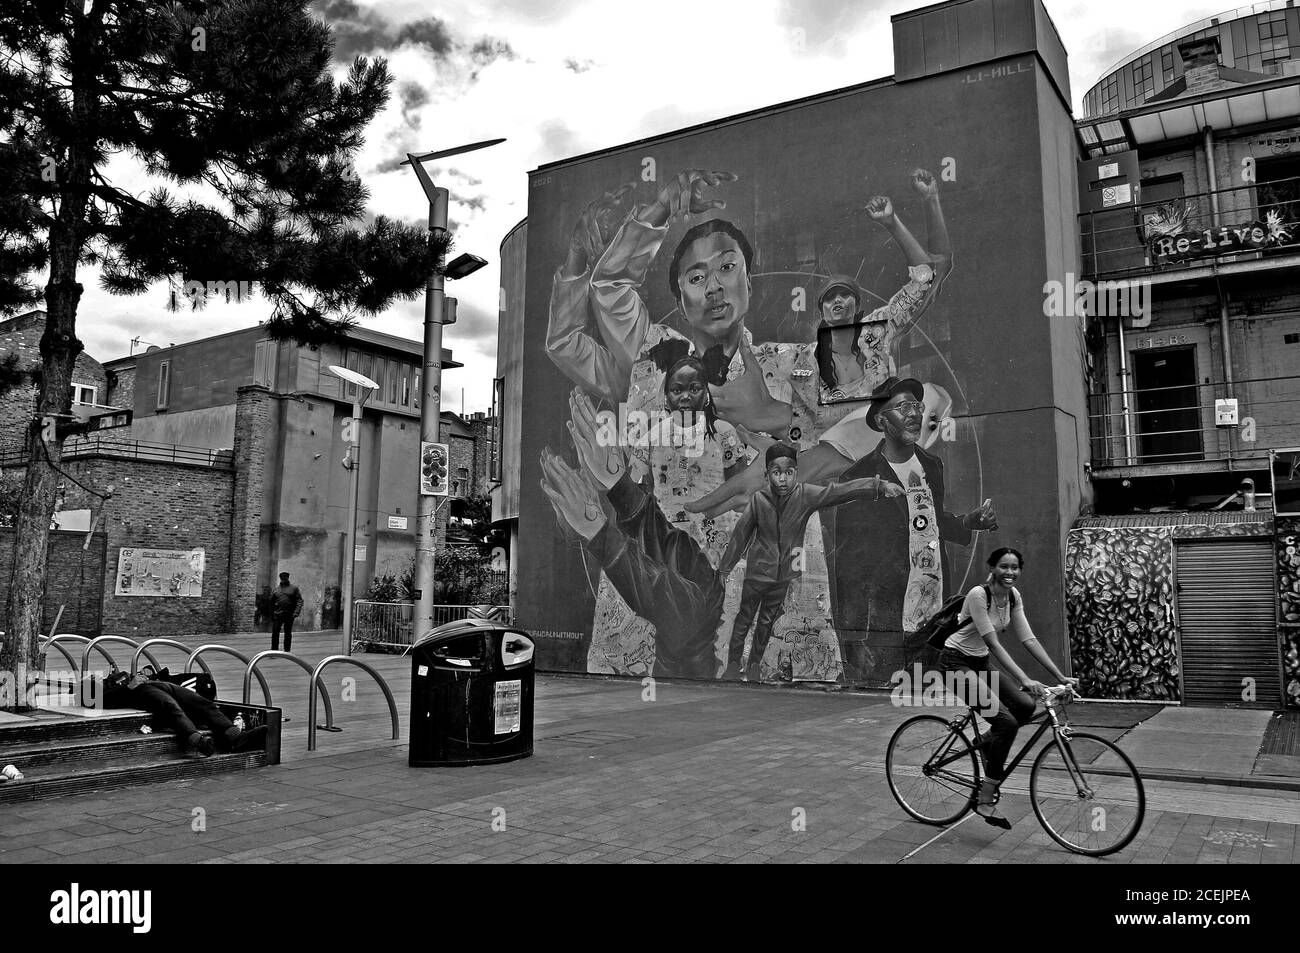 A SCENE OF GILLETT SQUARE IN DALSTON,EAST LONDON, WITH A COMMUNITY MURAL, A SMILING YOUNG WOMEN ON A BIKE & A MAN SLEEPING ON THE PAVEMENT. Stock Photo